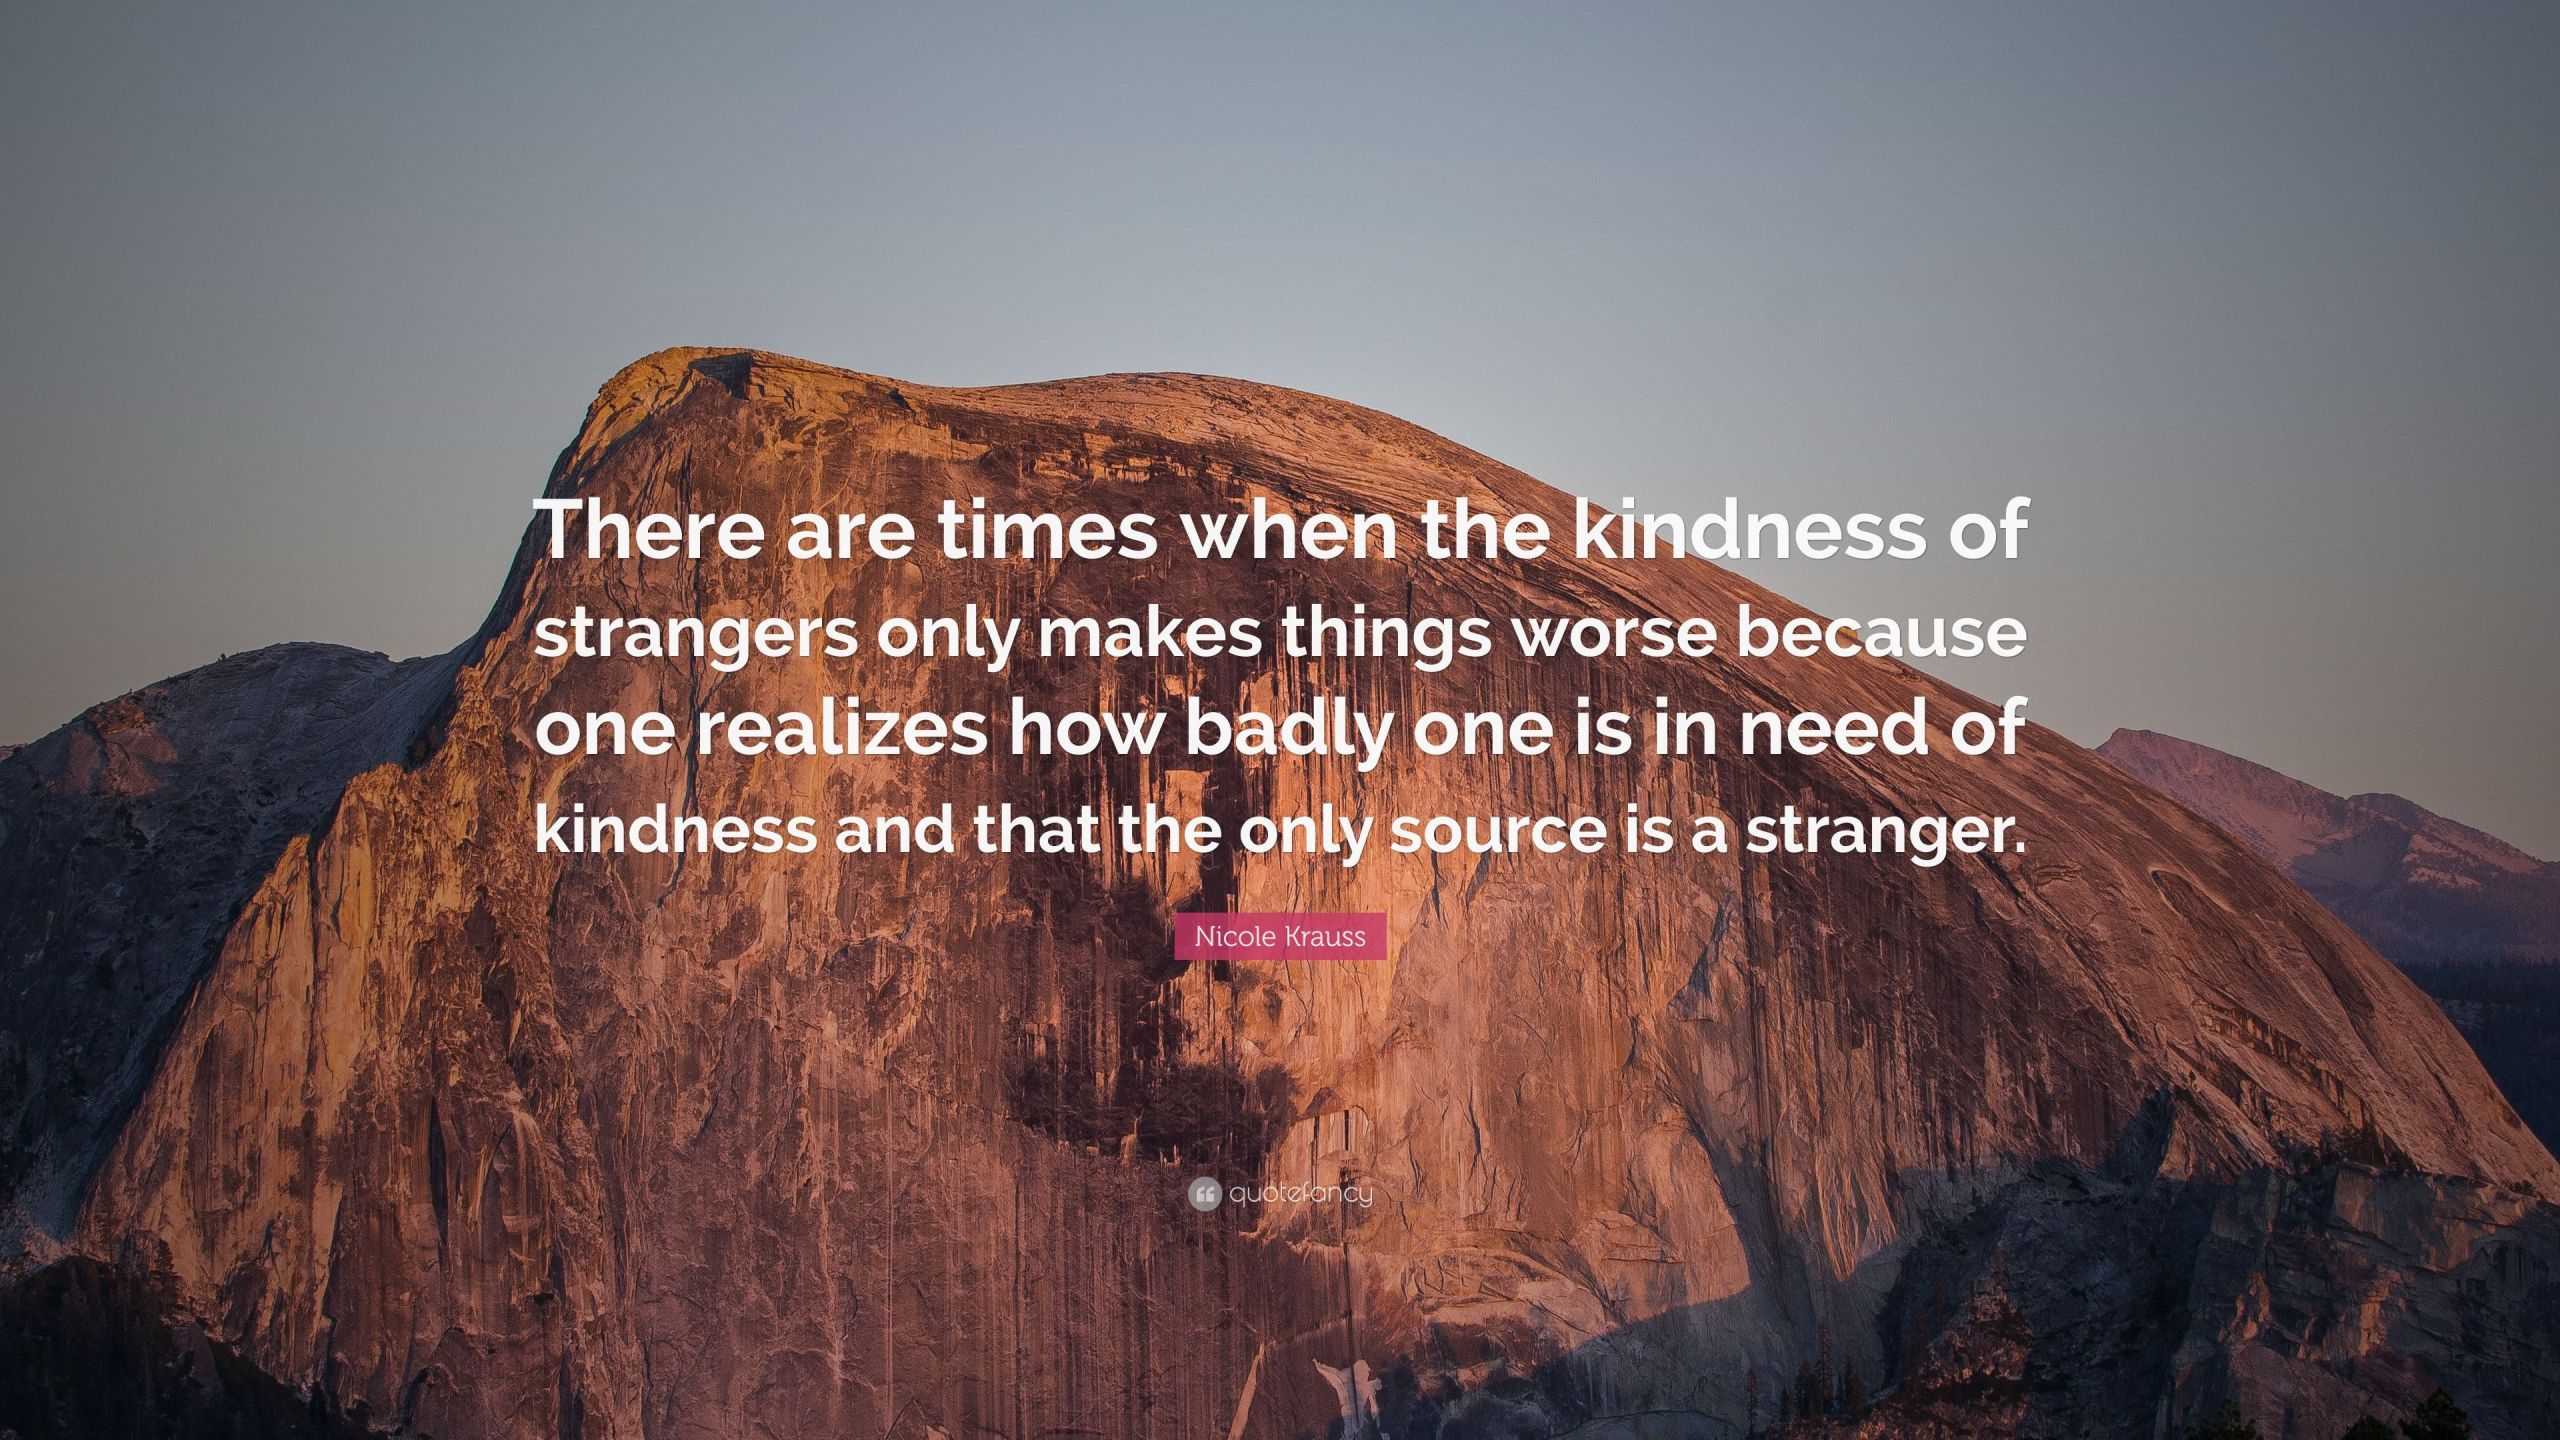 Kindness Of Strangers Quote
 Nicole Krauss Quote “There are times when the kindness of